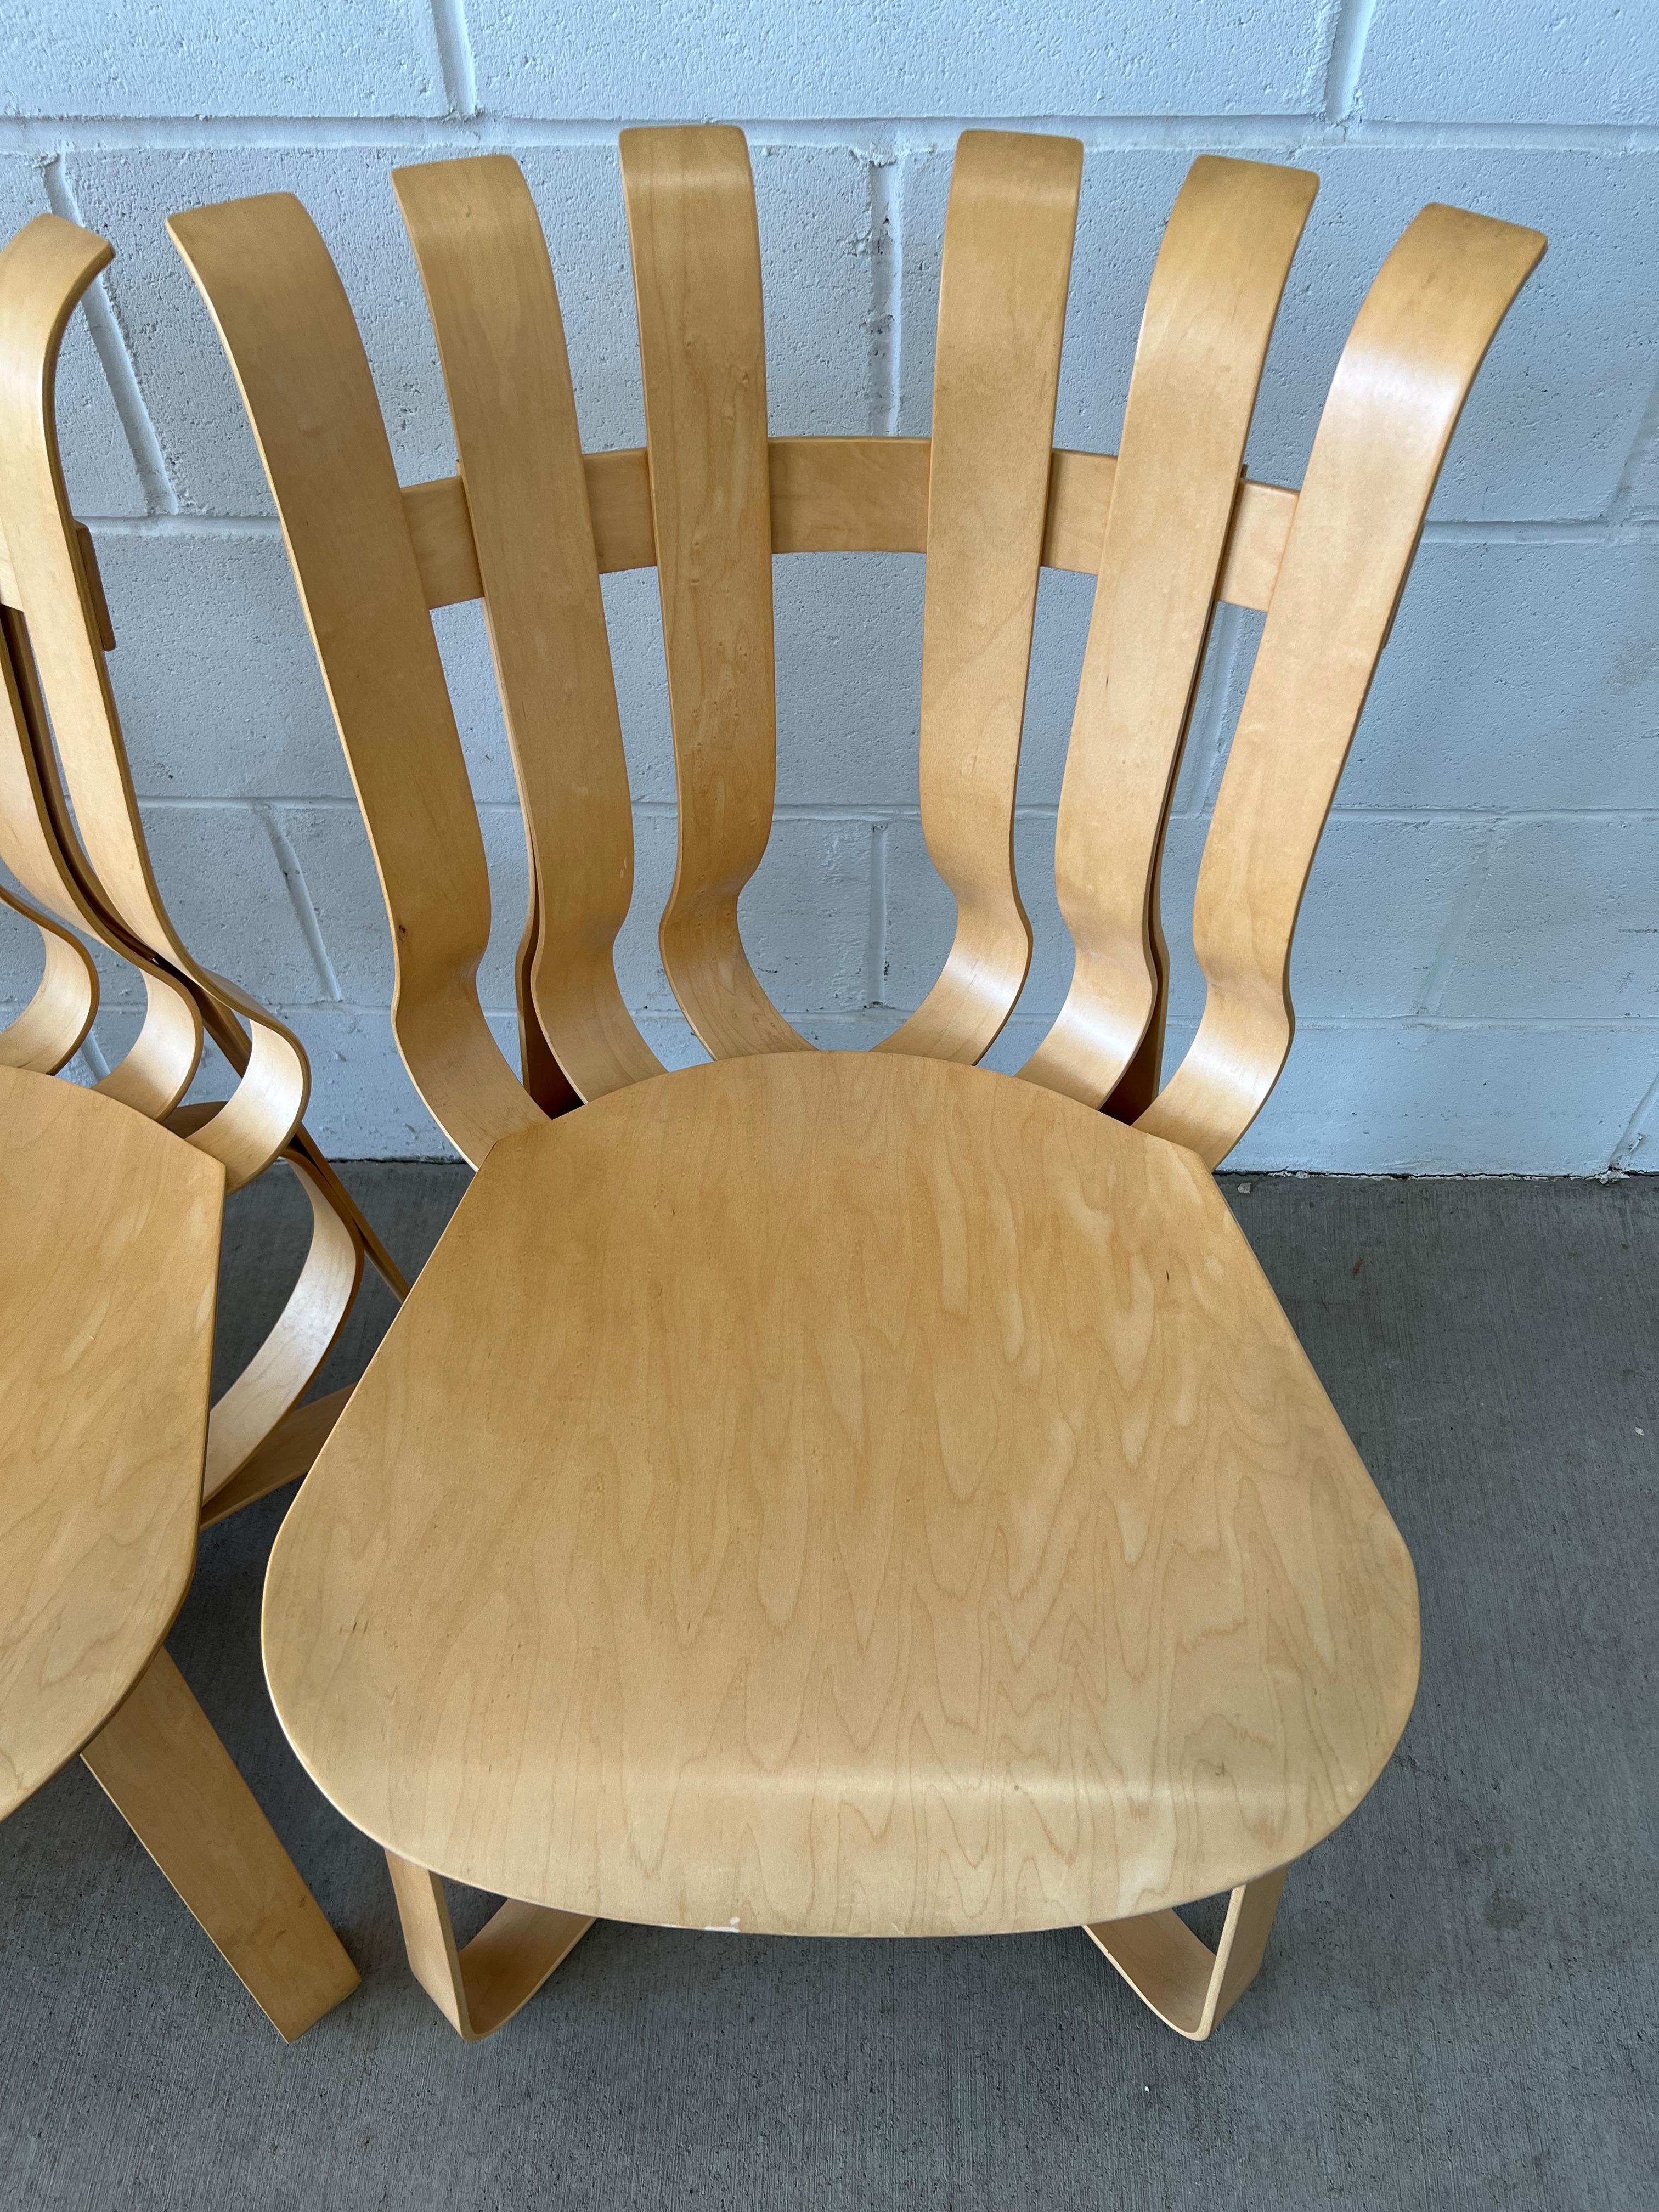 20th Century Hat Trick Chairs by Frank Gehry for Knoll, Set of 4